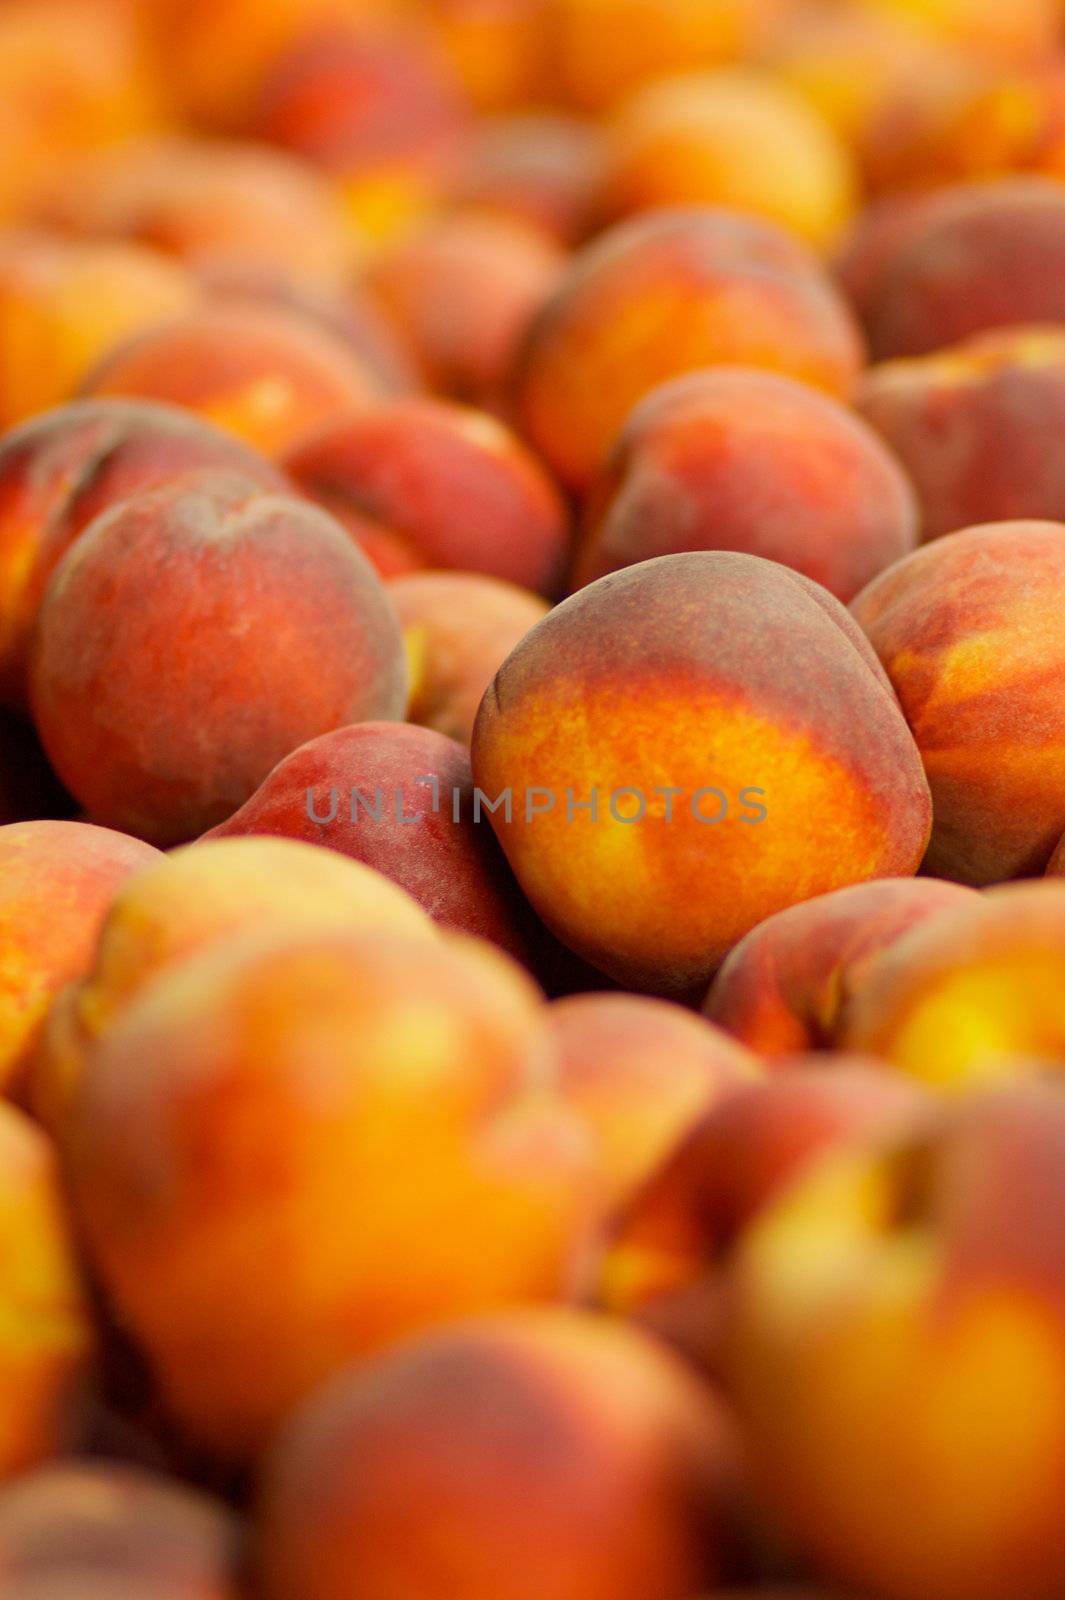 Pile of peaches by bobkeenan